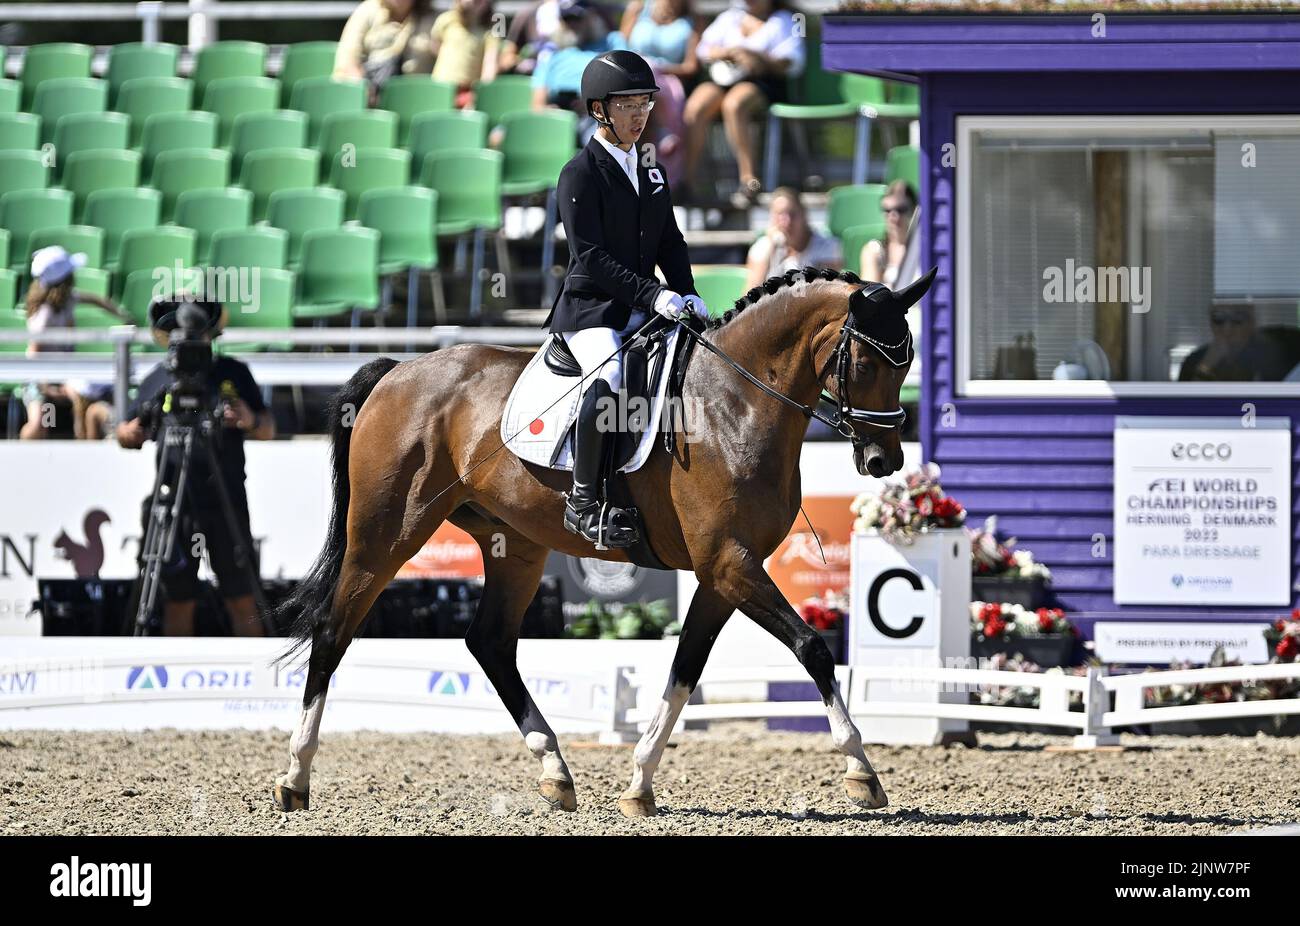 Herning. Denmark. 13 August 2022. World Equestrian Games.Sho Inaba (JPN) riding EXCLUSIVE during the FEI Para Dressage Team championships - Grade III. Stock Photo